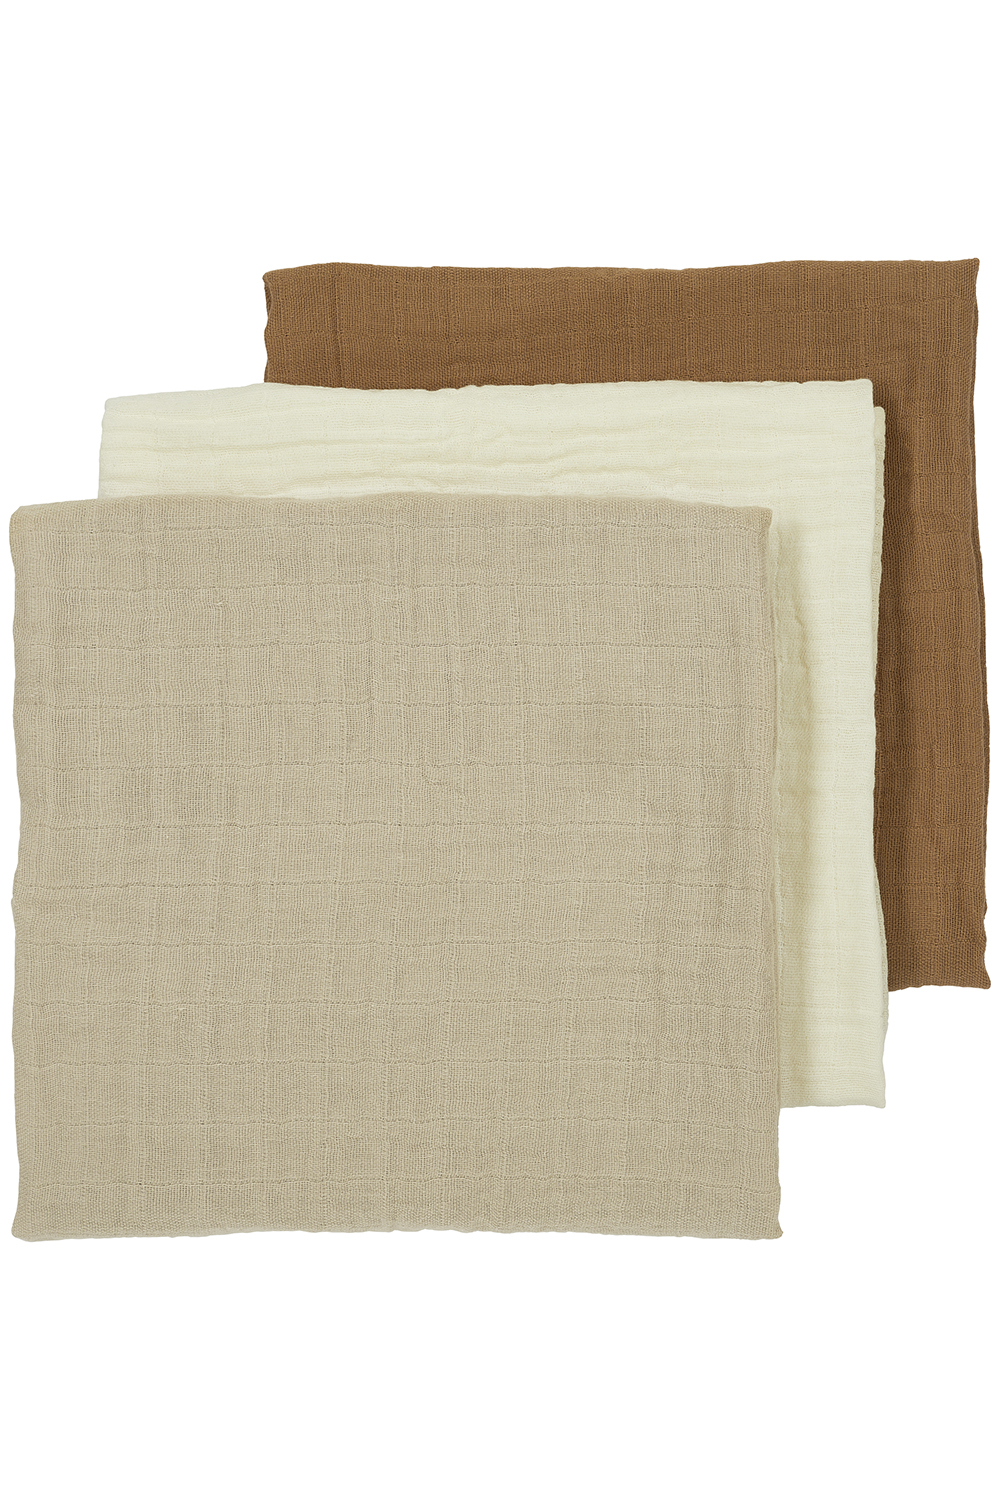 Pre-washed muslin squares 3-pack Uni - offwhite/sand/toffee - 70x70cm